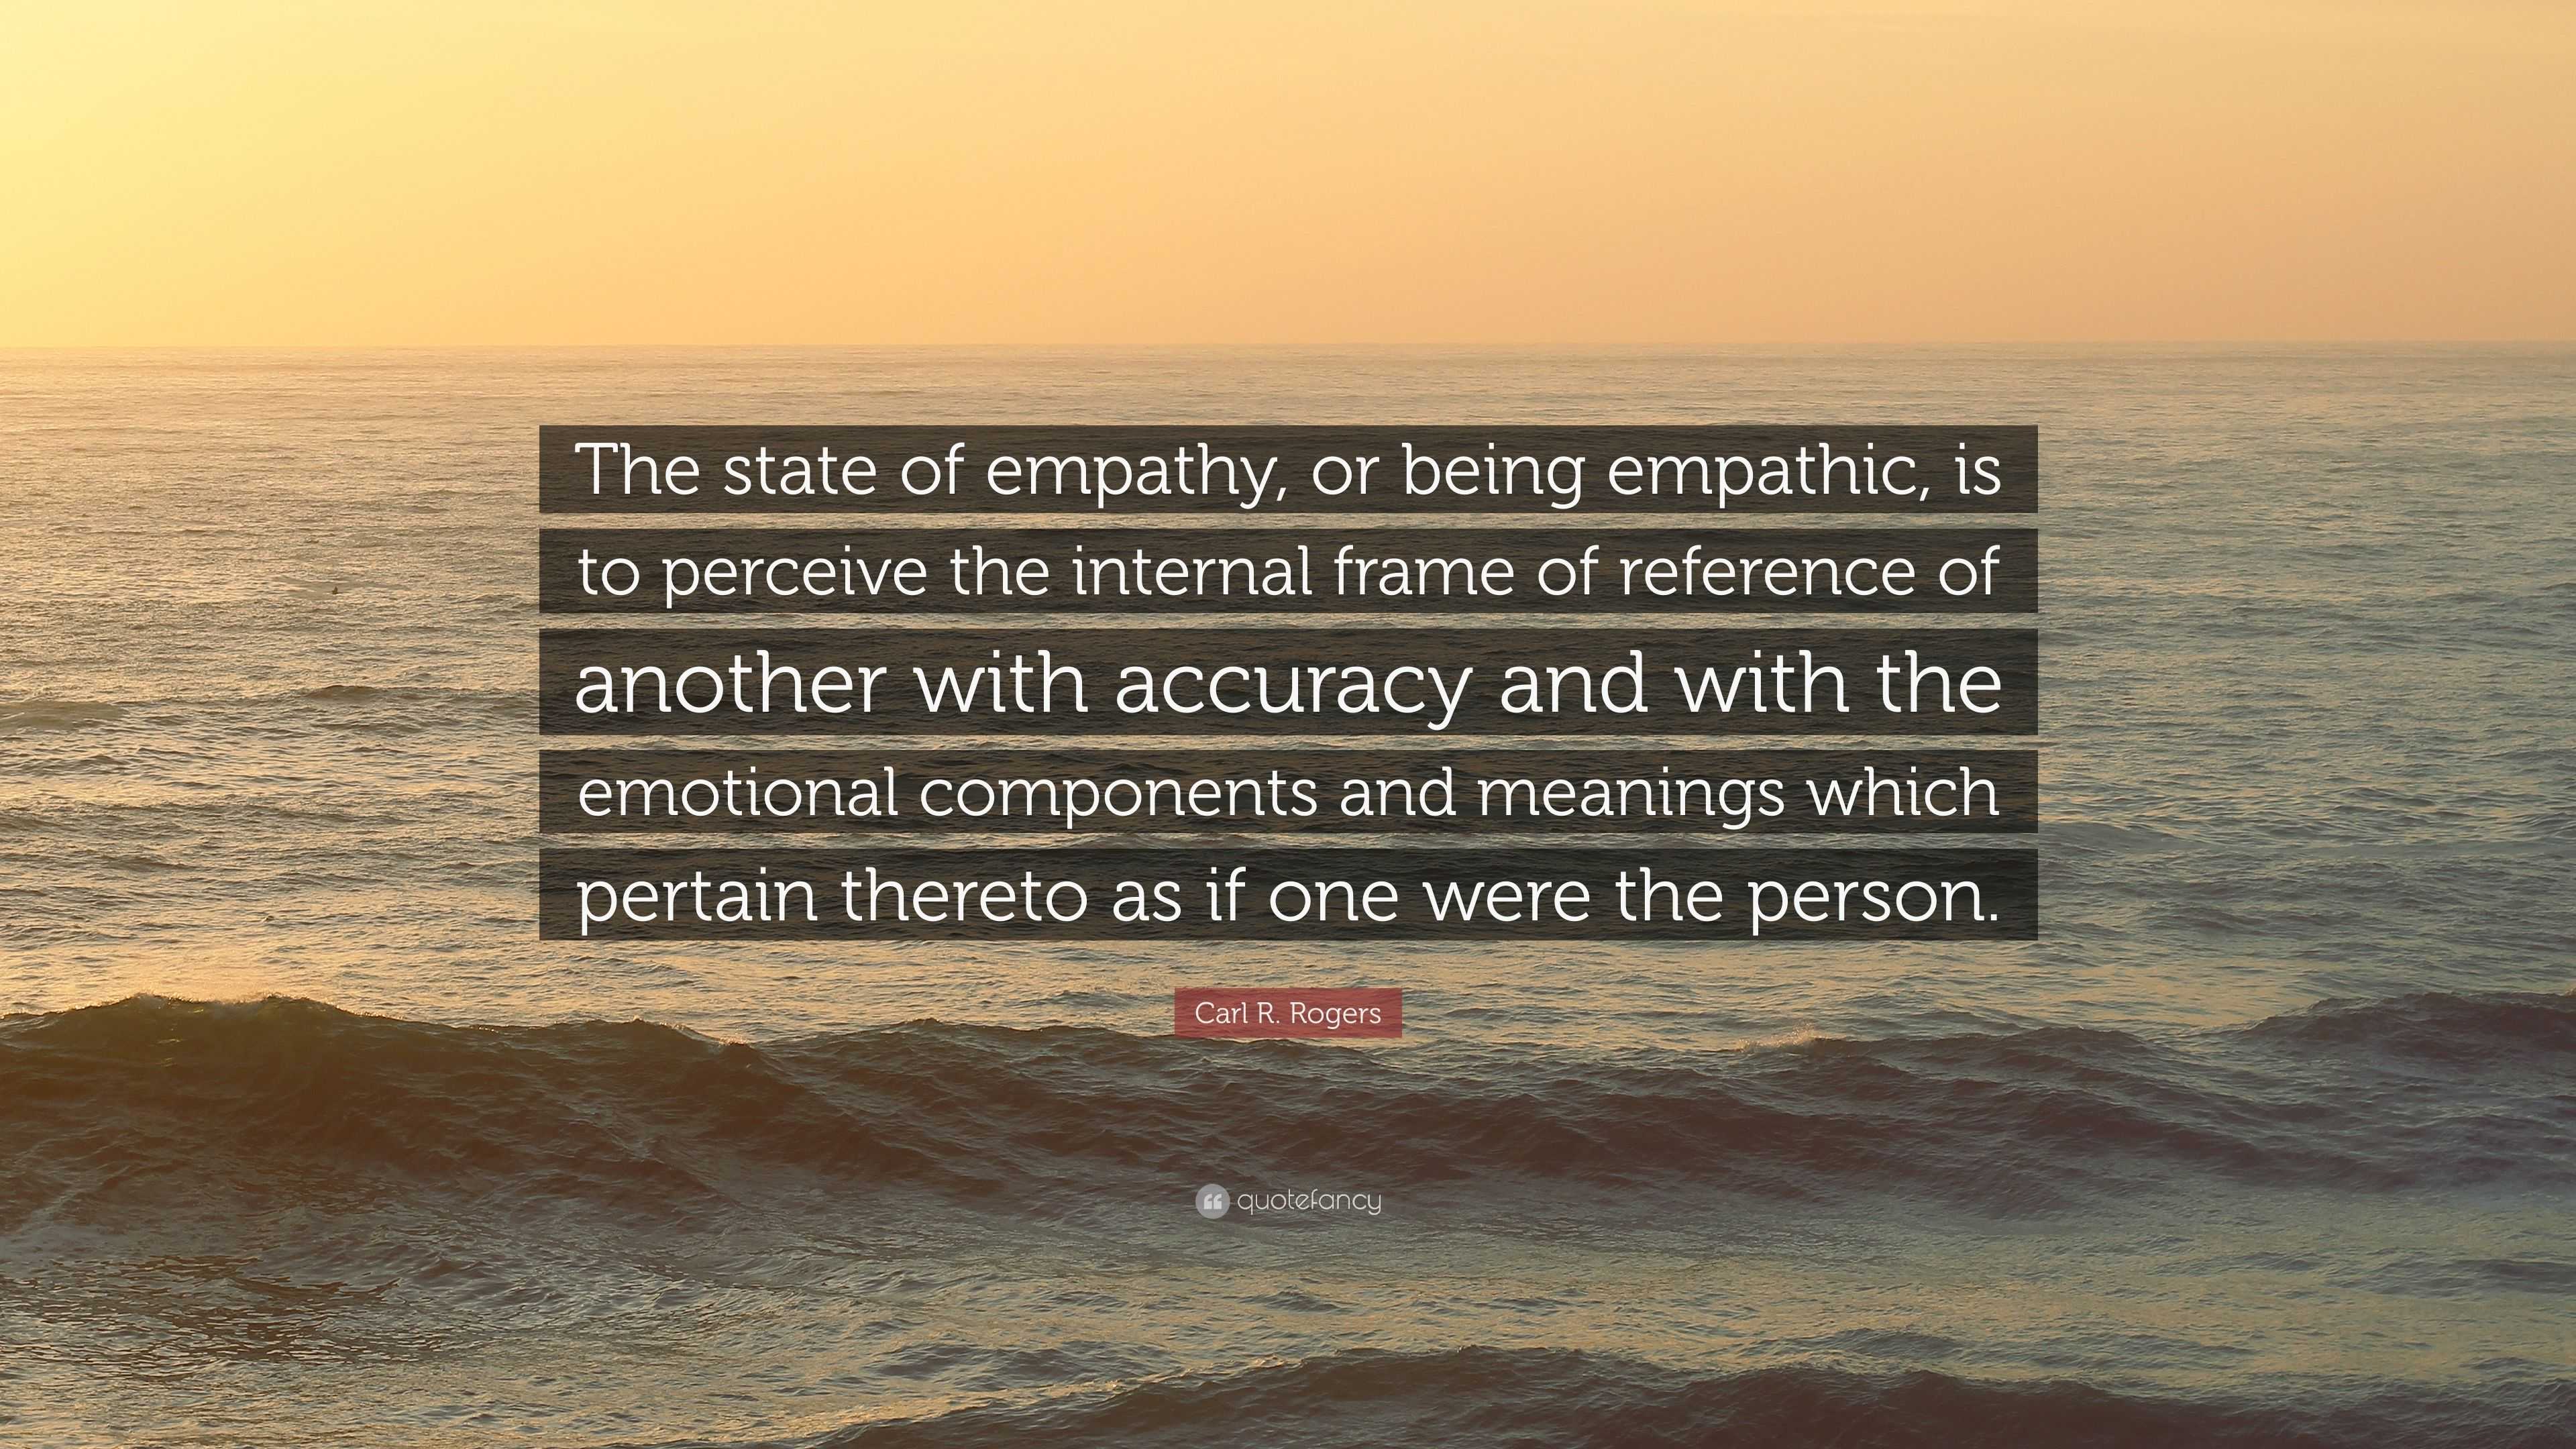 Carl R Rogers Quote The State Of Empathy Or Being Empathic Is To Perceive The Internal Frame Of Reference Of Another With Accuracy And Wit